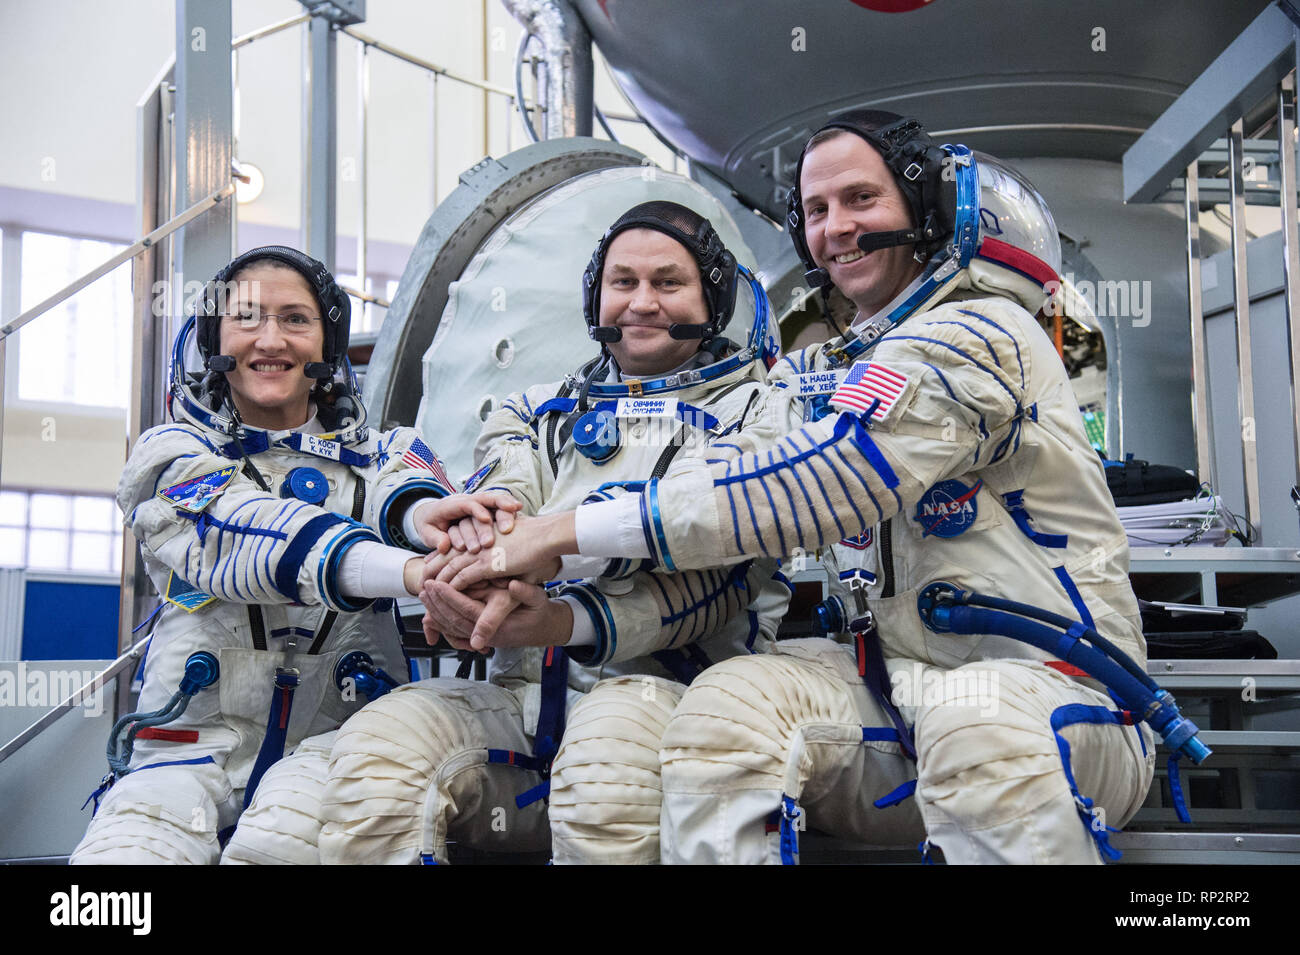 Star City, Russia. 20th Feb, 2019. International Space Station Expedition 59 crew members pose together for the media on their Soyuz spacecraft simulator February 20, 2019 at Star City, Russia. Left to right are: Christina Koch of NASA, Alexey Ovchinin of Roscosmos, and Nick Hague of NASA. They crew will launch March 14th from the Baikonur Cosmodrome in Kazakhstan on the Soyuz MS-12 spacecraft for a six-and-a-half month mission on the International Space Station. Credit: Planetpix/Alamy Live News Stock Photo